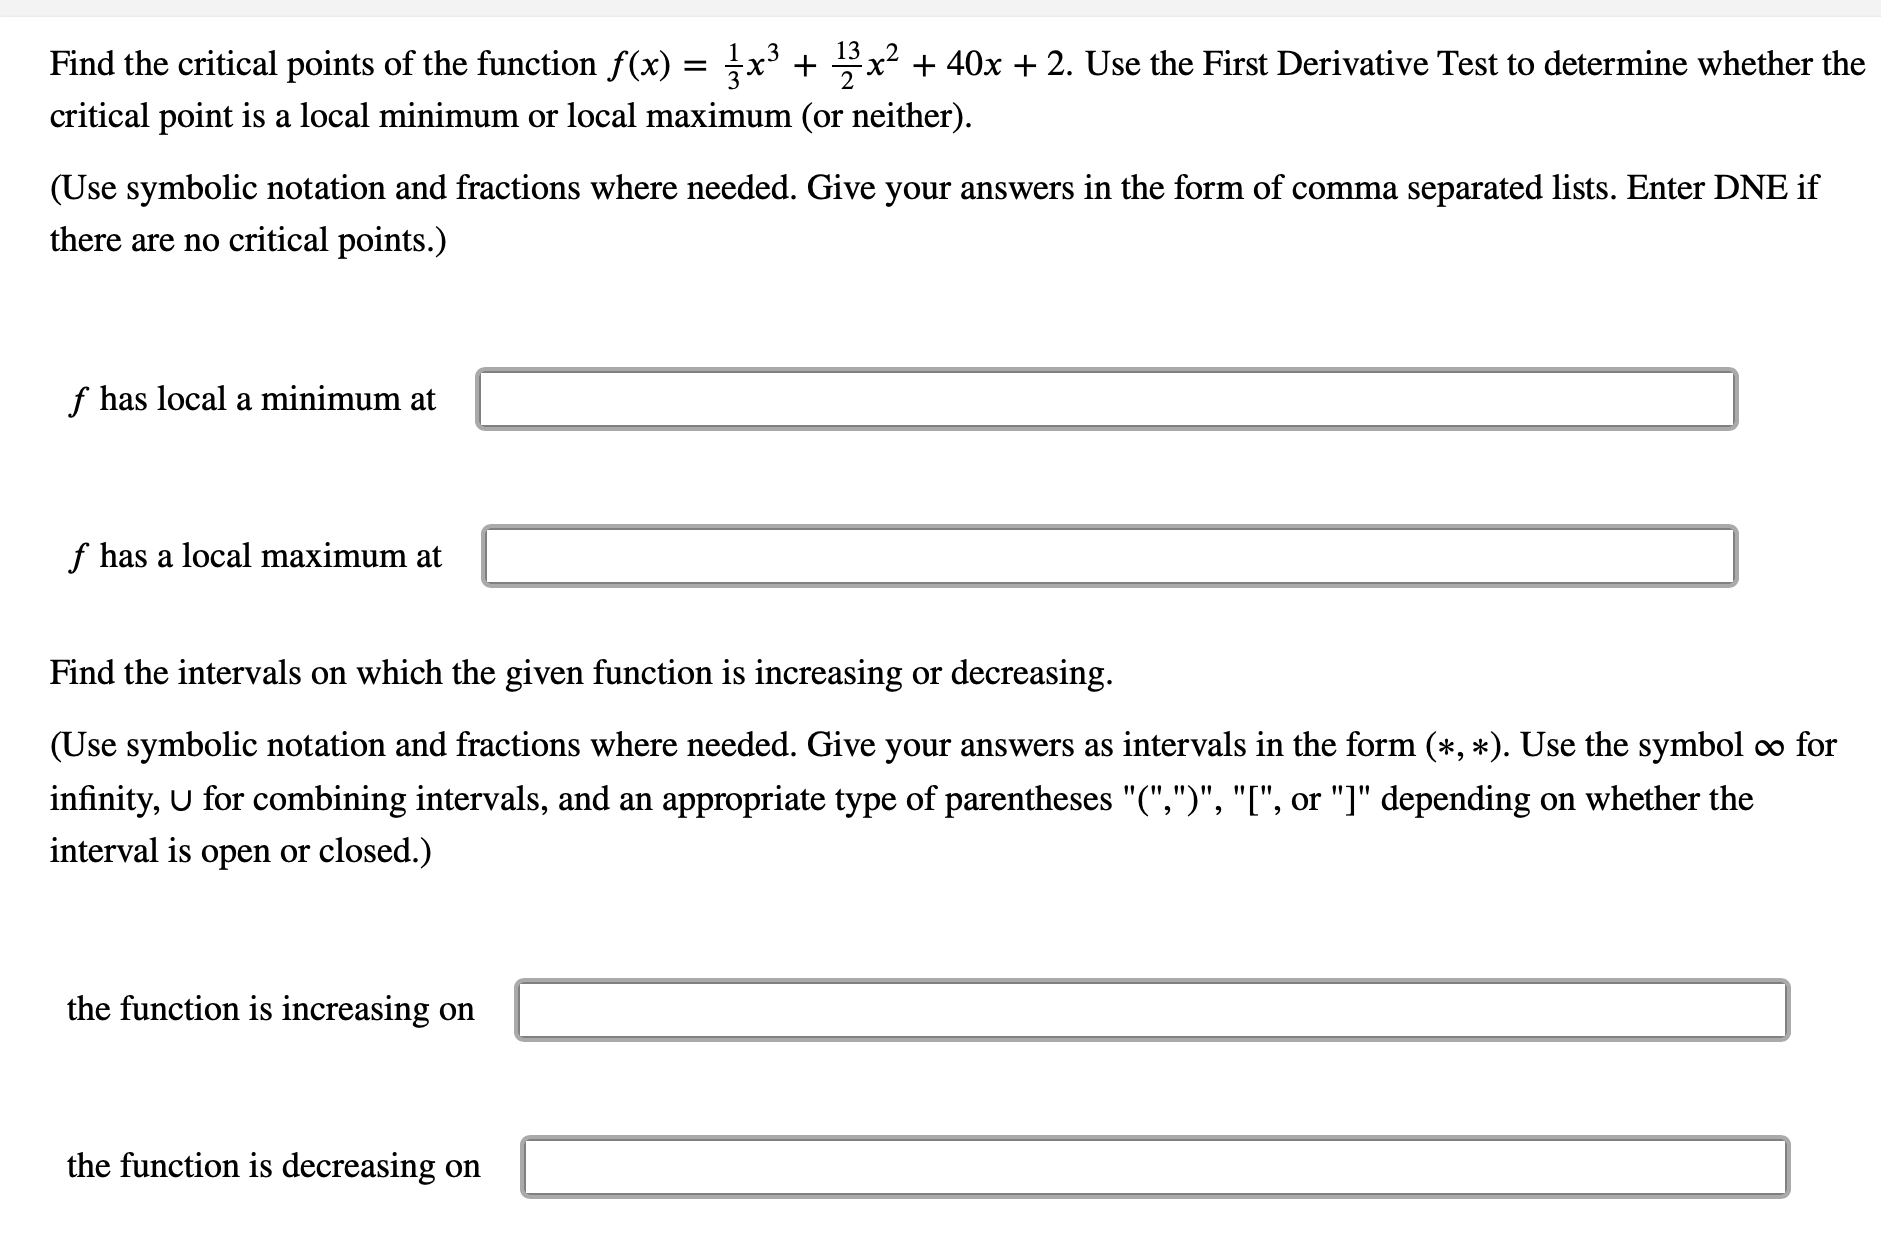 2
Find the critical points of the function f(x) = x³ +
x² + 40x + 2. Use the First Derivative Test to determine whether the
critical point is a local minimum or local maximum (or neither).
(Use symbolic notation and fractions where needed. Give your answers in the form of comma separated lists. Enter DNE if
there are no critical points.)
f has local a minimum at
f has a local maximum at
Find the intervals on which the given function is increasing or decreasing.
(Use symbolic notation and fractions where needed. Give your answers as intervals in the form (*, *). Use the symbol ∞ for
infinity, U for combining intervals, and an appropriate type of parentheses "(",")", "[", or "]" depending on whether the
interval is open or closed.)
the function is increasing on
the function is decreasing on
